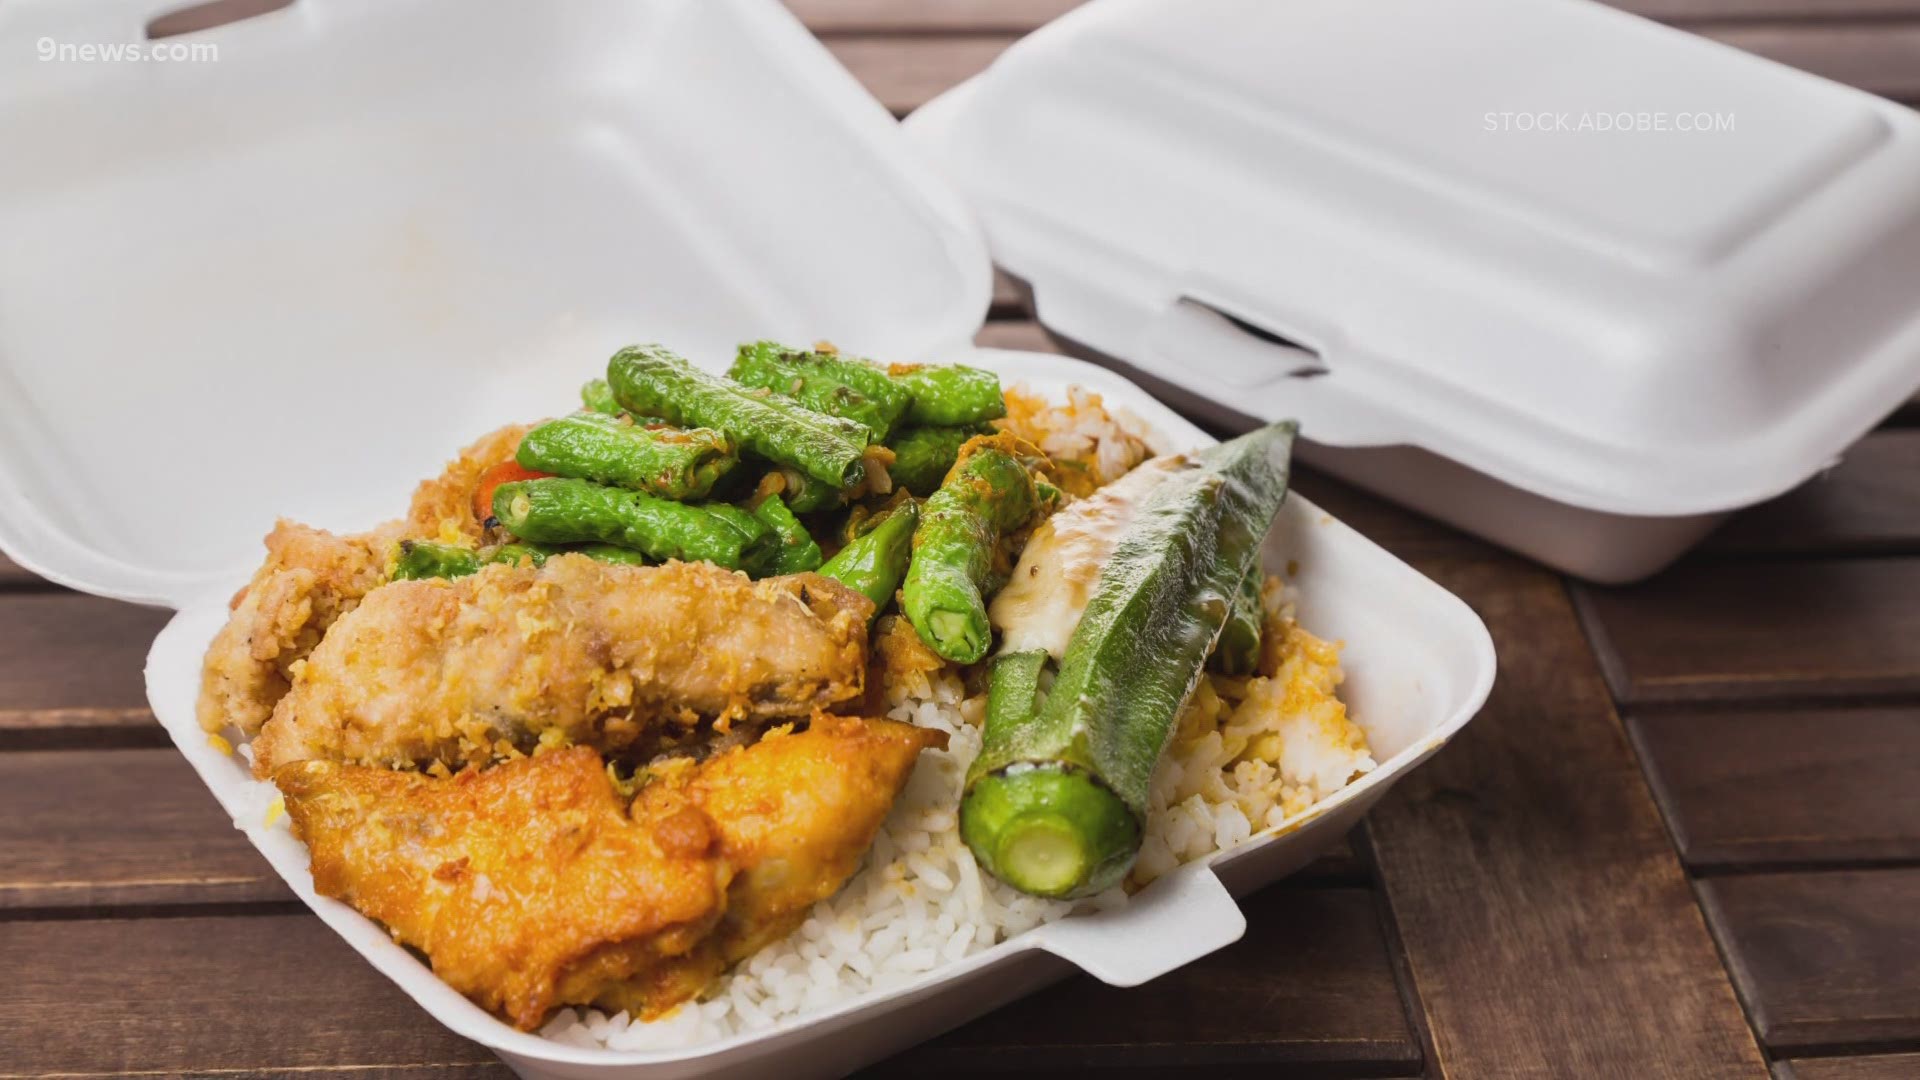 The bill would stop stores from using plastic bags and restaurants from using Styrofoam containers.